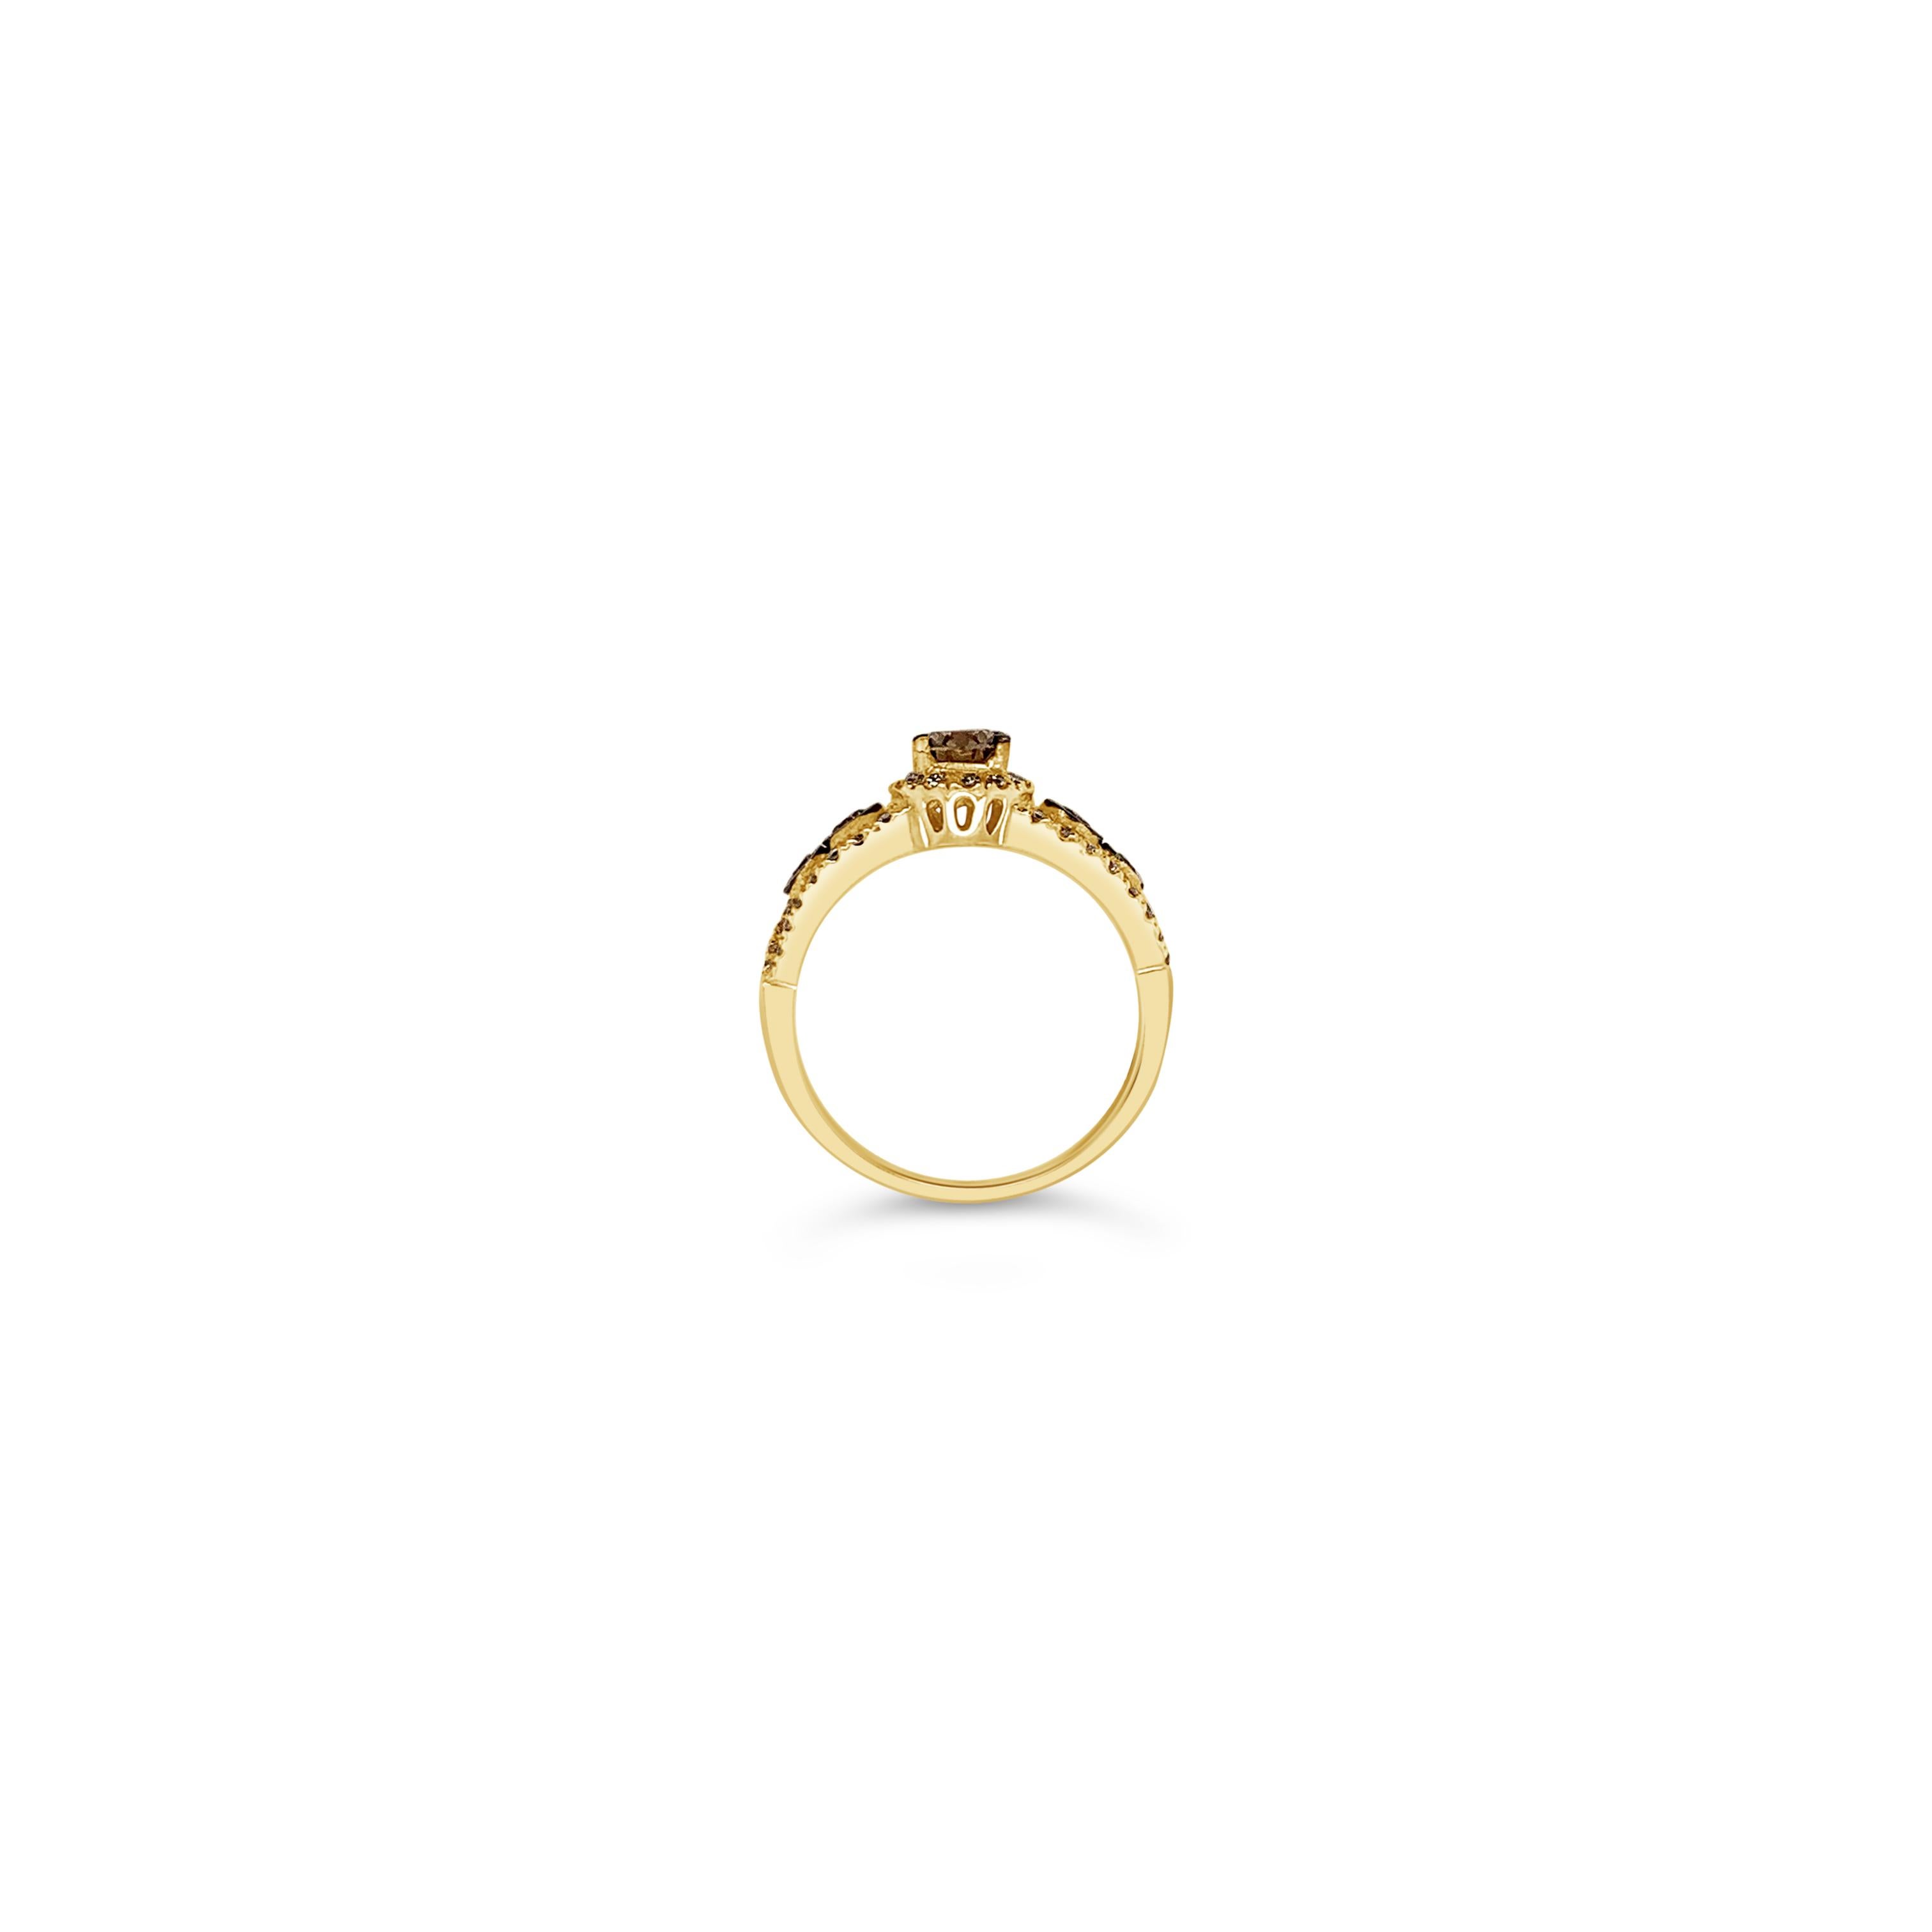 Le Vian Chocolatier® Ring featuring .54 cts. Chocolate Diamonds®, .30 cts. Vanilla Diamonds® set in 14K Honey Gold™

Diamonds Breakdown:
.54 cts Brown Diamonds
.30 cts White Diamonds

Gems Breakdown:
None

Ring may or may not be sizable, please feel